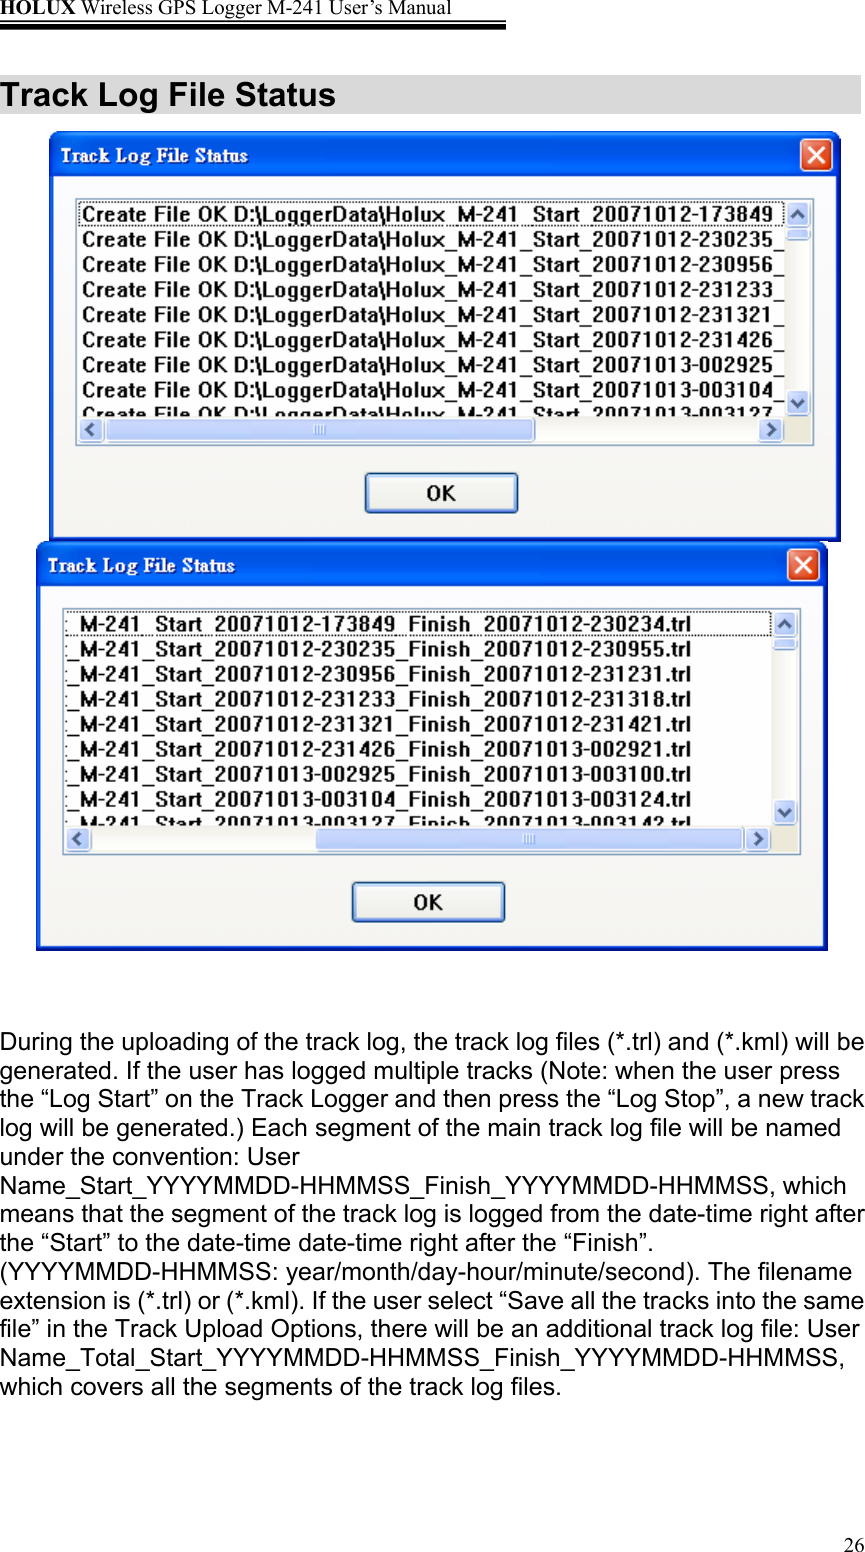 HOLUX Wireless GPS Logger M-241 User’s Manual   26Track Log File Status        During the uploading of the track log, the track log files (*.trl) and (*.kml) will be generated. If the user has logged multiple tracks (Note: when the user press the “Log Start” on the Track Logger and then press the “Log Stop”, a new track log will be generated.) Each segment of the main track log file will be named under the convention: User Name_Start_YYYYMMDD-HHMMSS_Finish_YYYYMMDD-HHMMSS, which means that the segment of the track log is logged from the date-time right after the “Start” to the date-time date-time right after the “Finish”. (YYYYMMDD-HHMMSS: year/month/day-hour/minute/second). The filename extension is (*.trl) or (*.kml). If the user select “Save all the tracks into the same file” in the Track Upload Options, there will be an additional track log file: User Name_Total_Start_YYYYMMDD-HHMMSS_Finish_YYYYMMDD-HHMMSS, which covers all the segments of the track log files.  